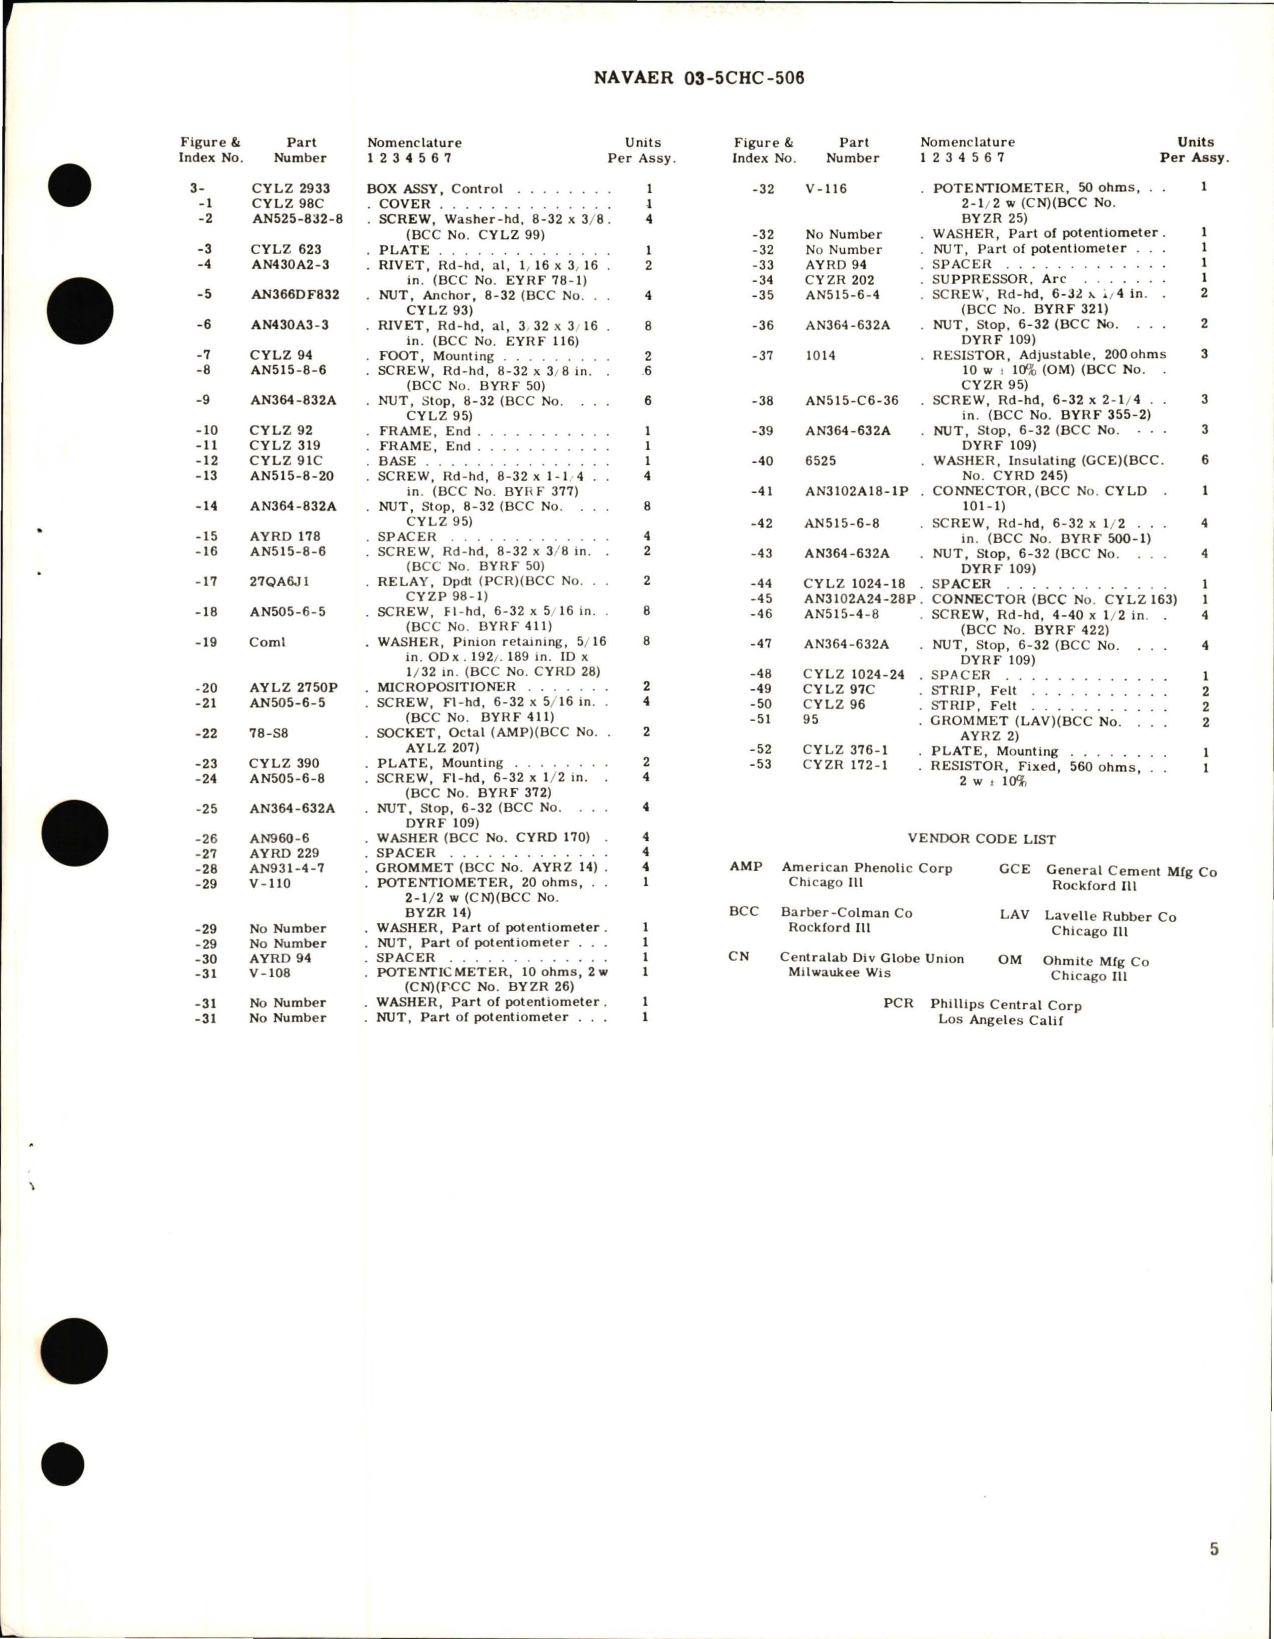 Sample page 5 from AirCorps Library document: Overhaul Instructions with Parts Breakdown for Control Box - CYLZ 2933 